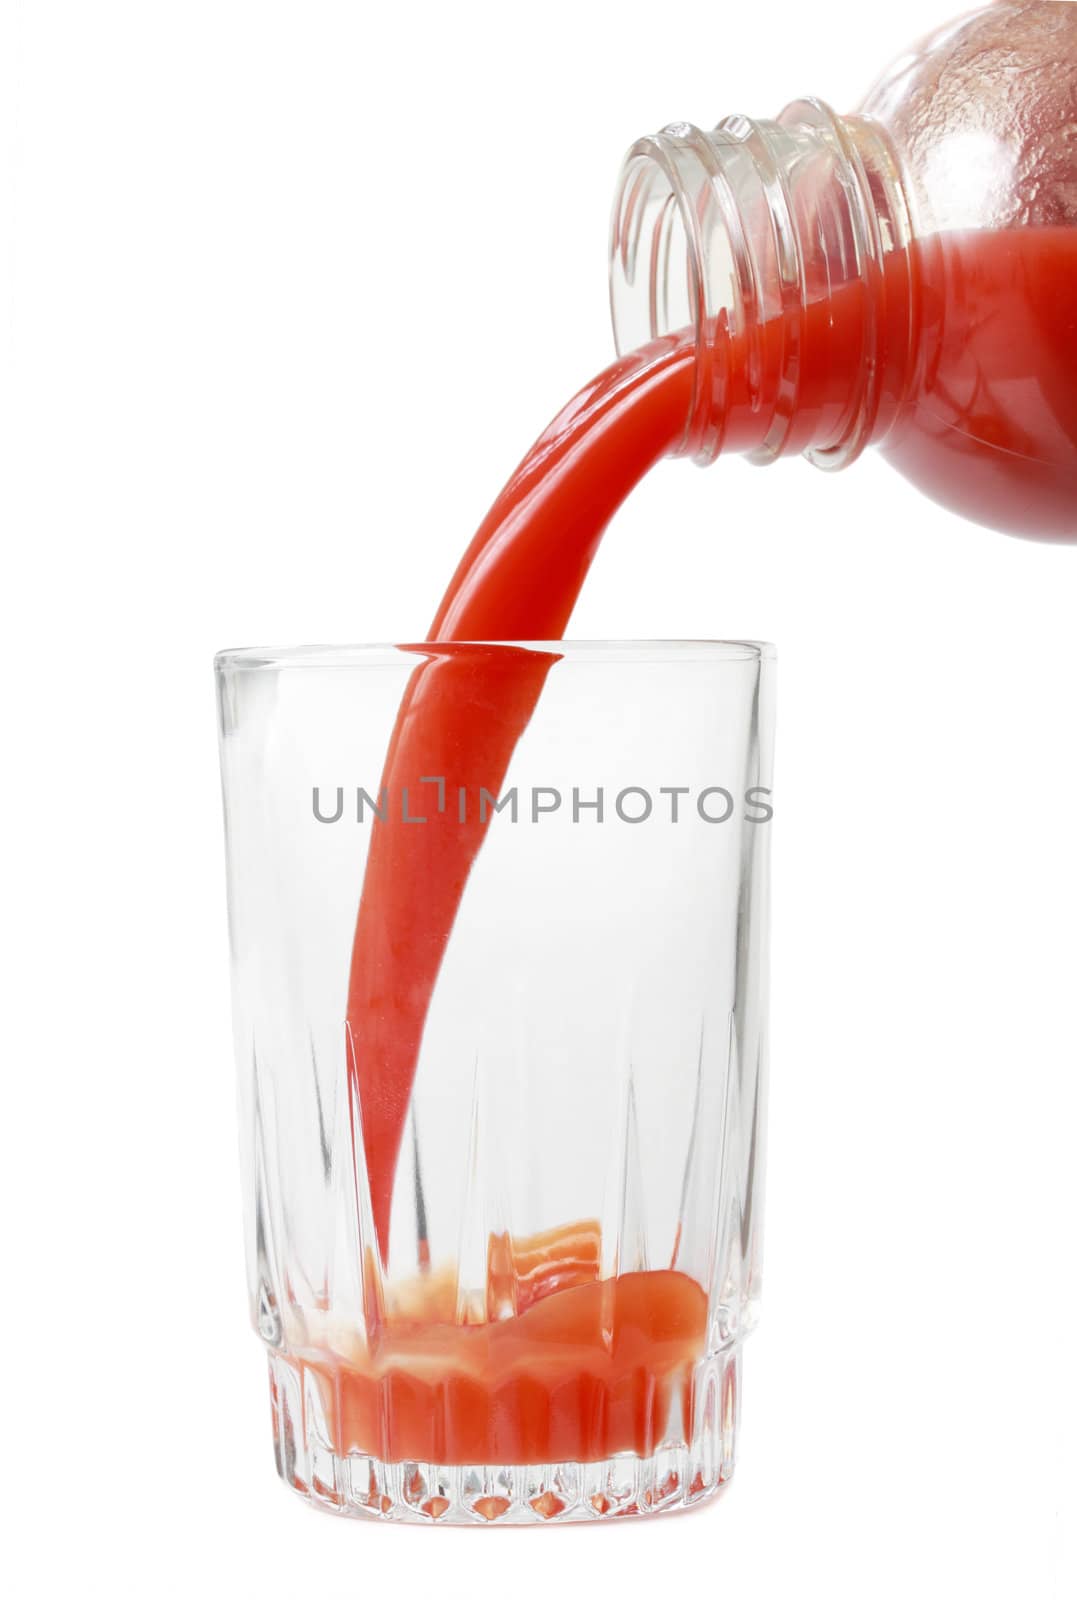 pouring tomato juice in a glass, isolated on white